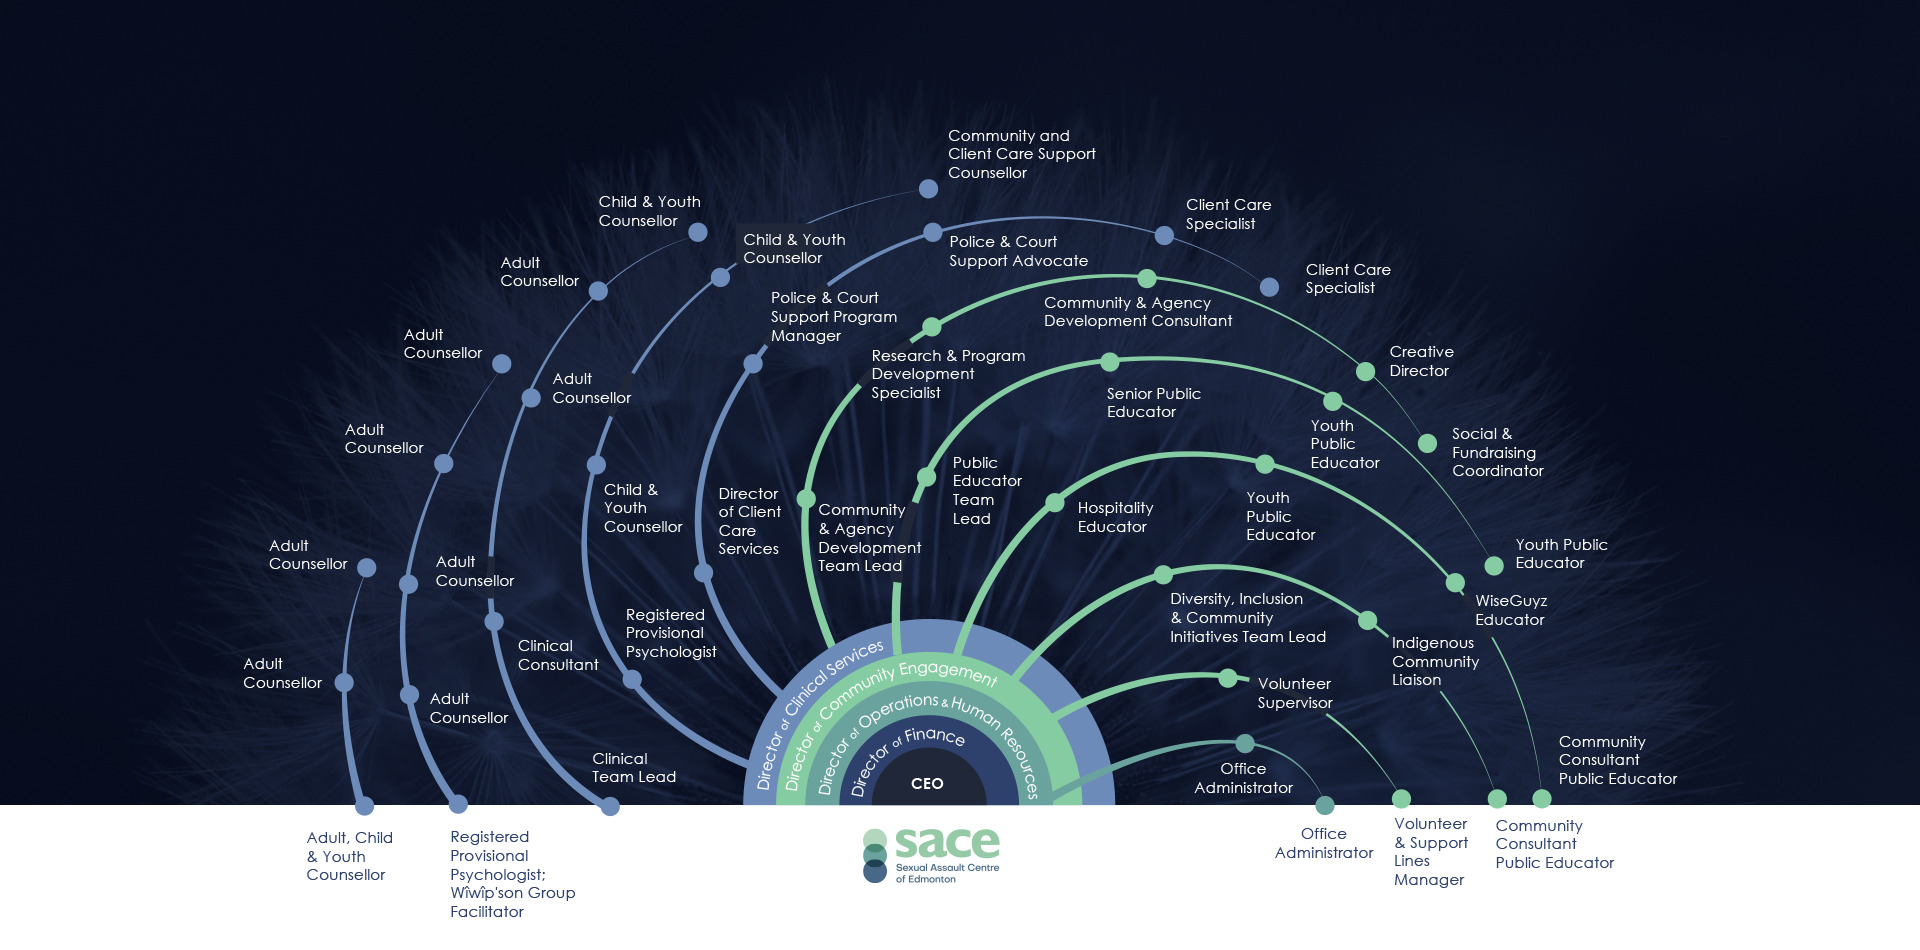 An infographic of 2021-2022 SACE staff depicting the various roles and departments in a semi-circle design on a dark background with an outline of a dandelion.